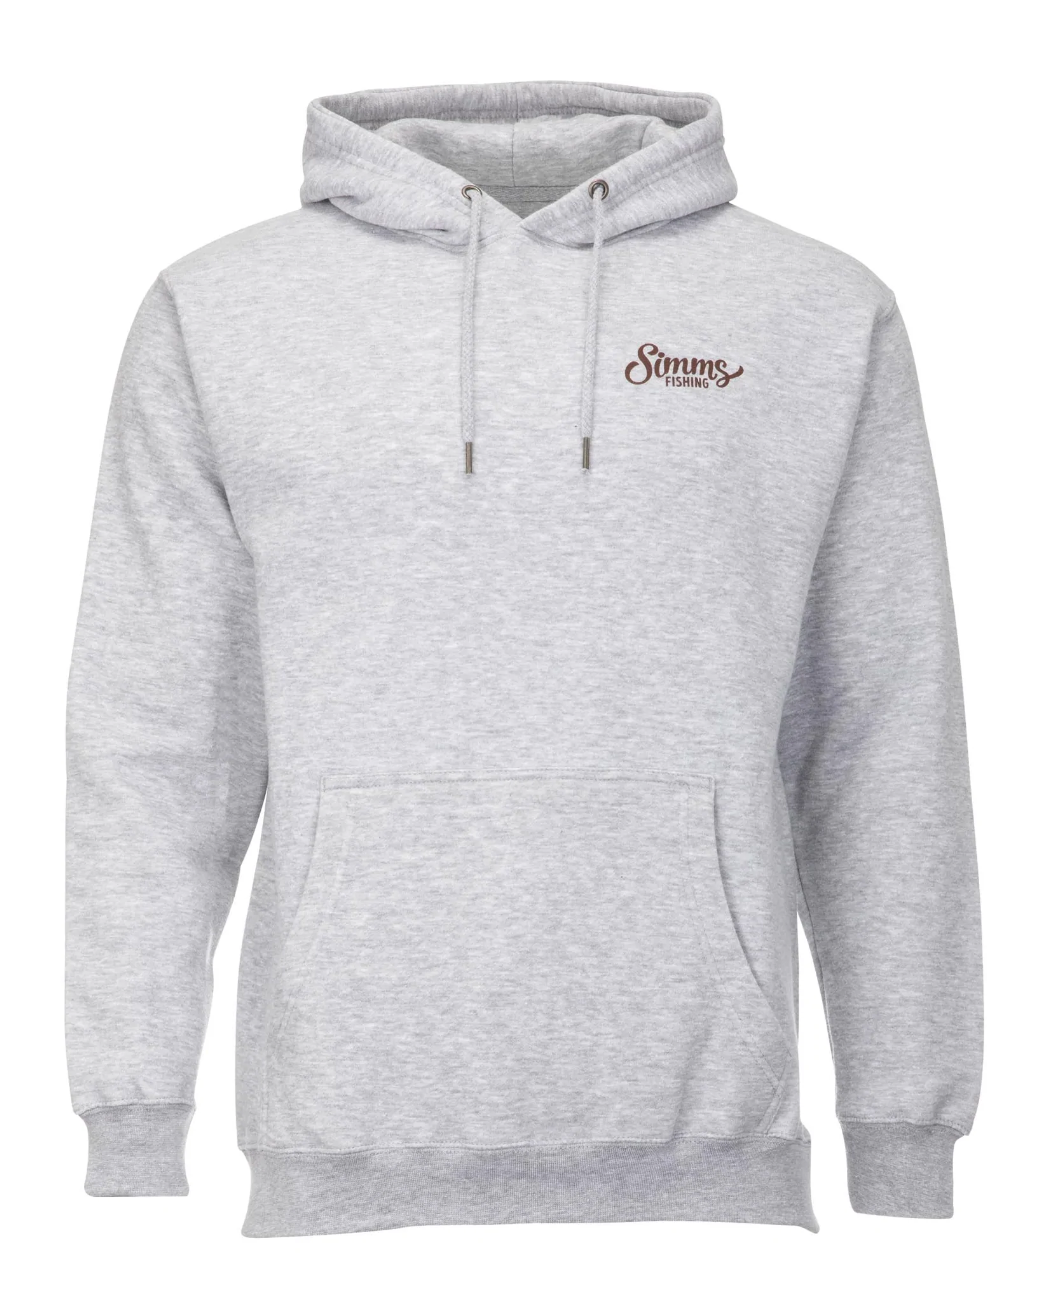 Simms Fishing Two Tone Hoody For Sale Online